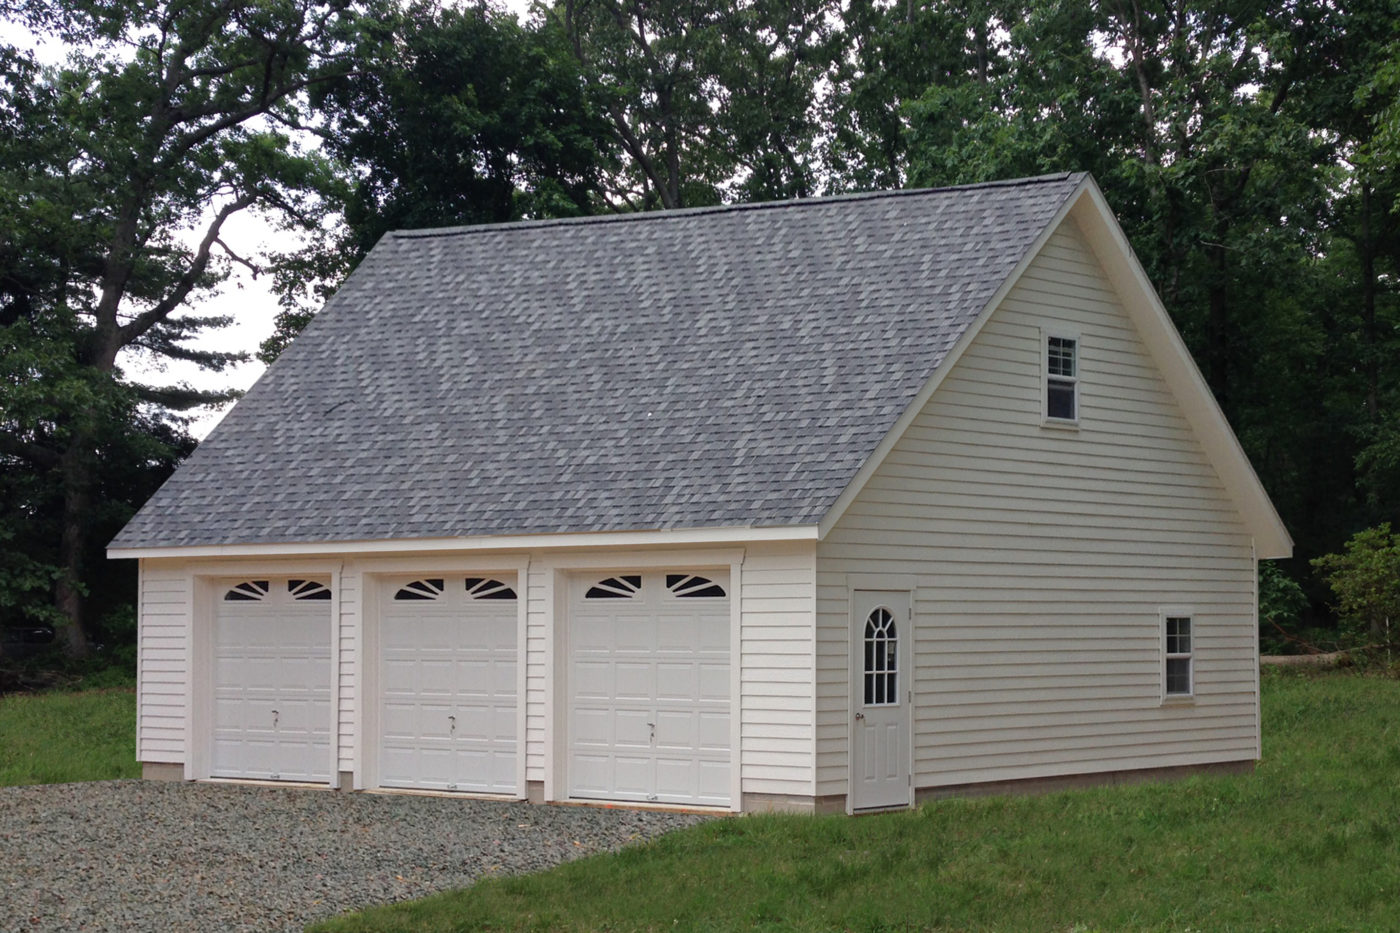 How Much Does A Detached Garage Cost, Cost To Build Two Car Garage With Bonus Room